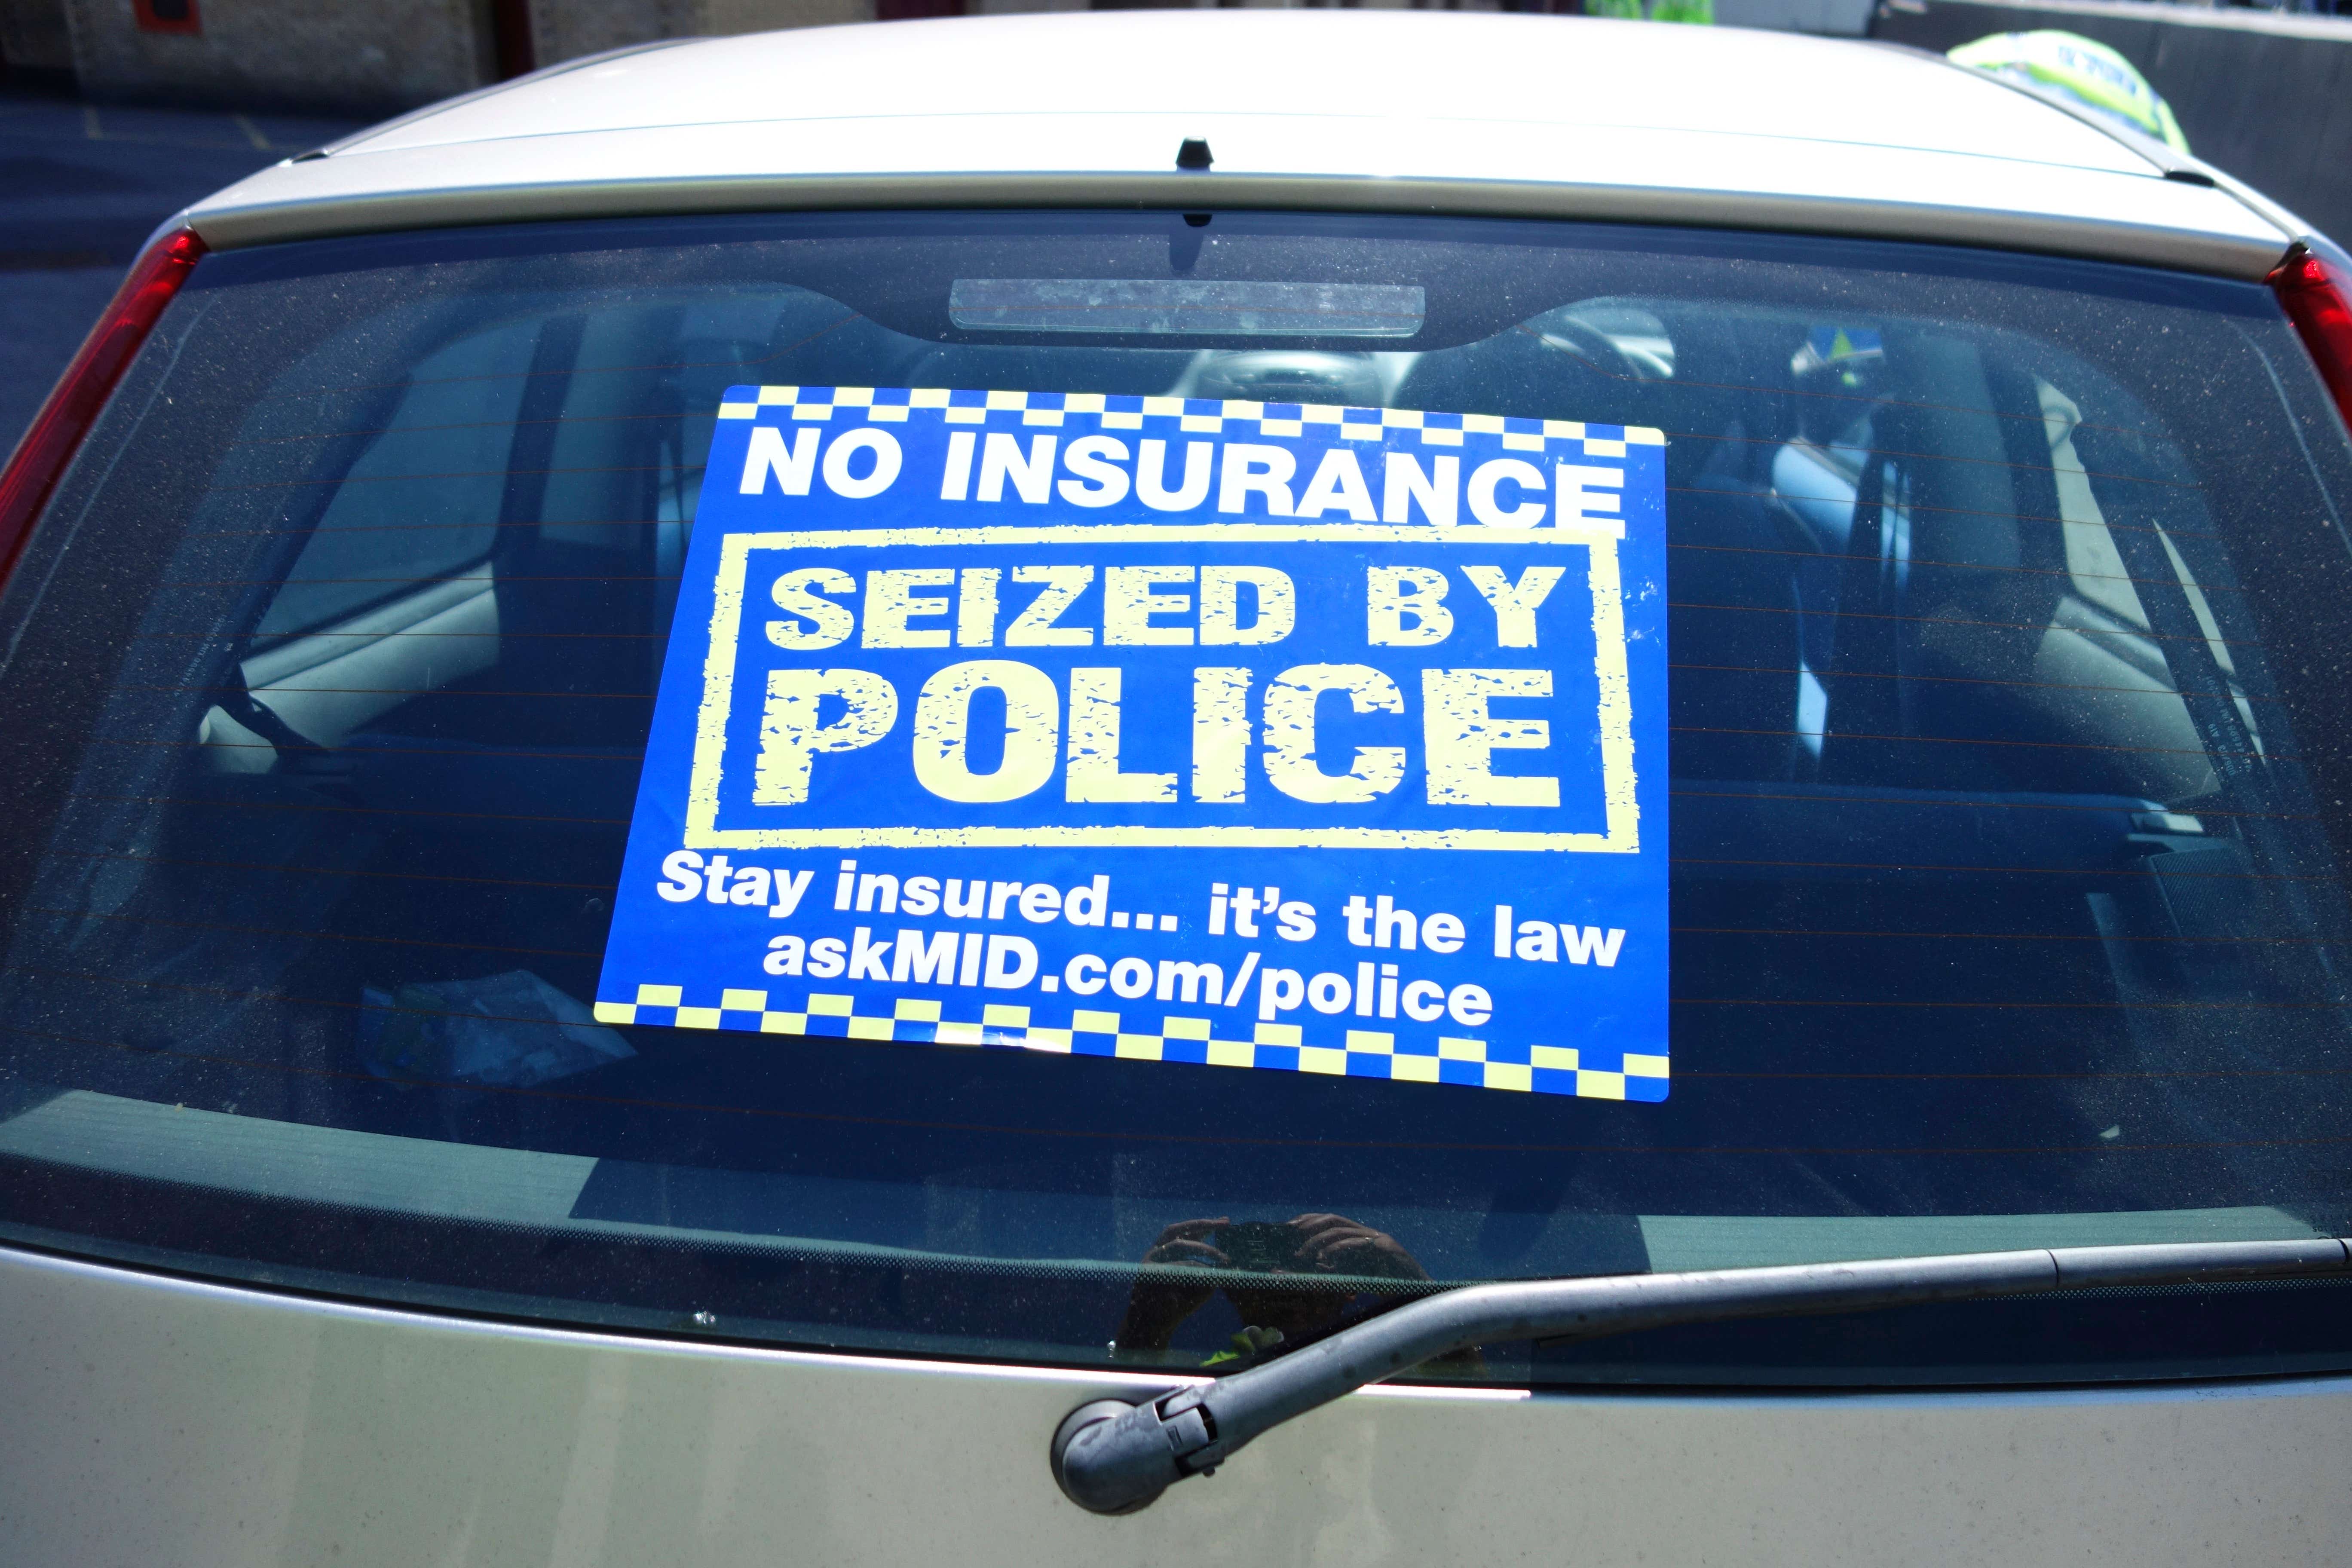 Police no-insurance seizure notice on a car's back window. 